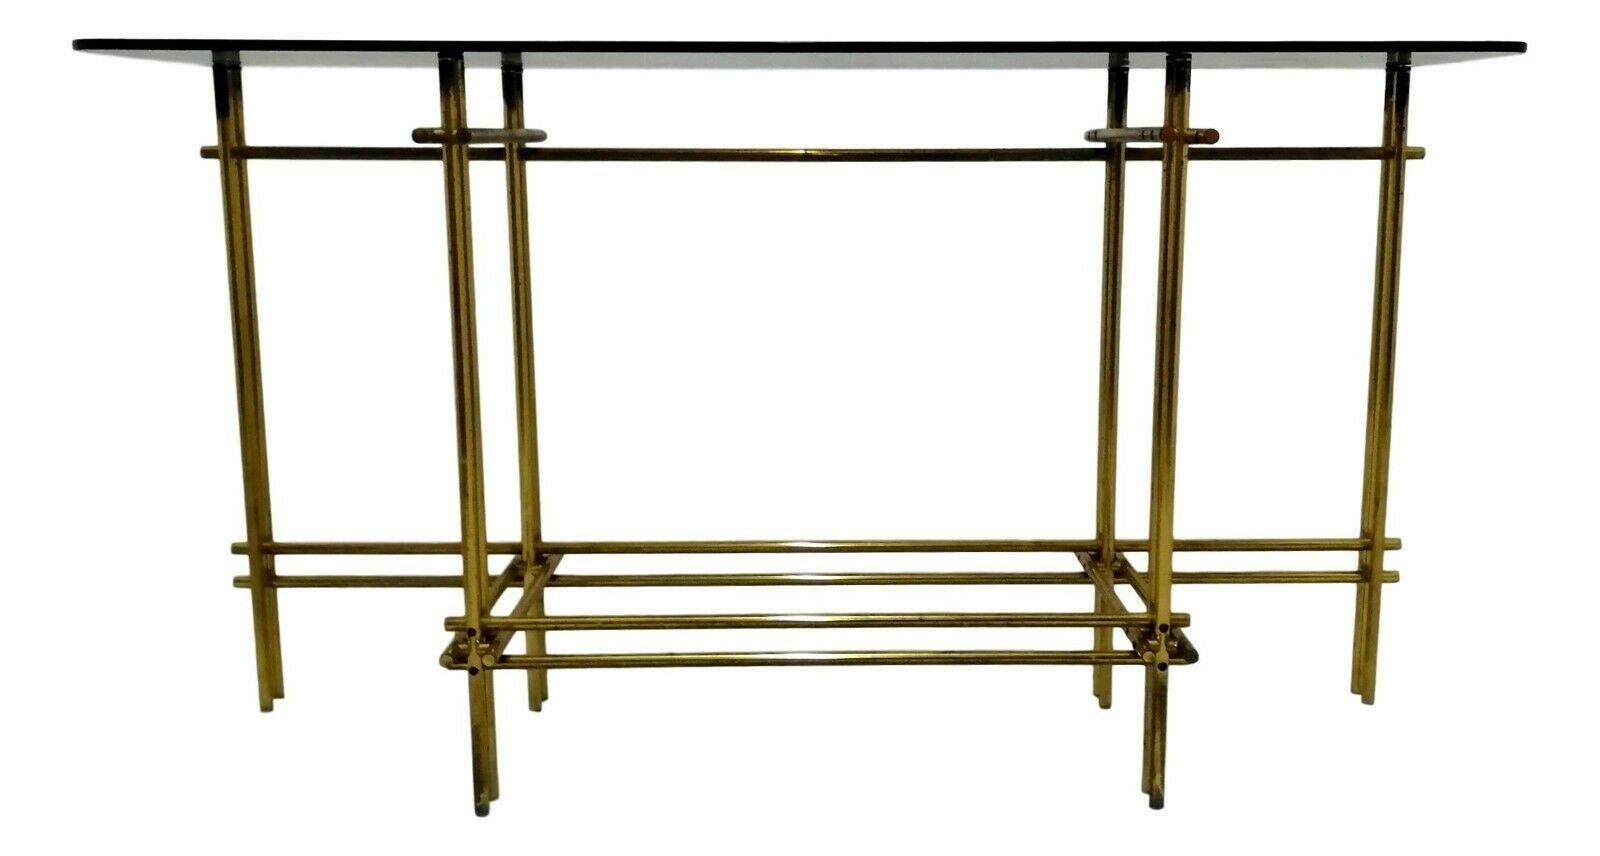 console in brass and original glass from the 70s, made of polished brass tubing 

it measures 130 cm in length, approximately 70 cm in height and 35 cm in depth

very good storage conditions, as shown in the photos

the glass is not included